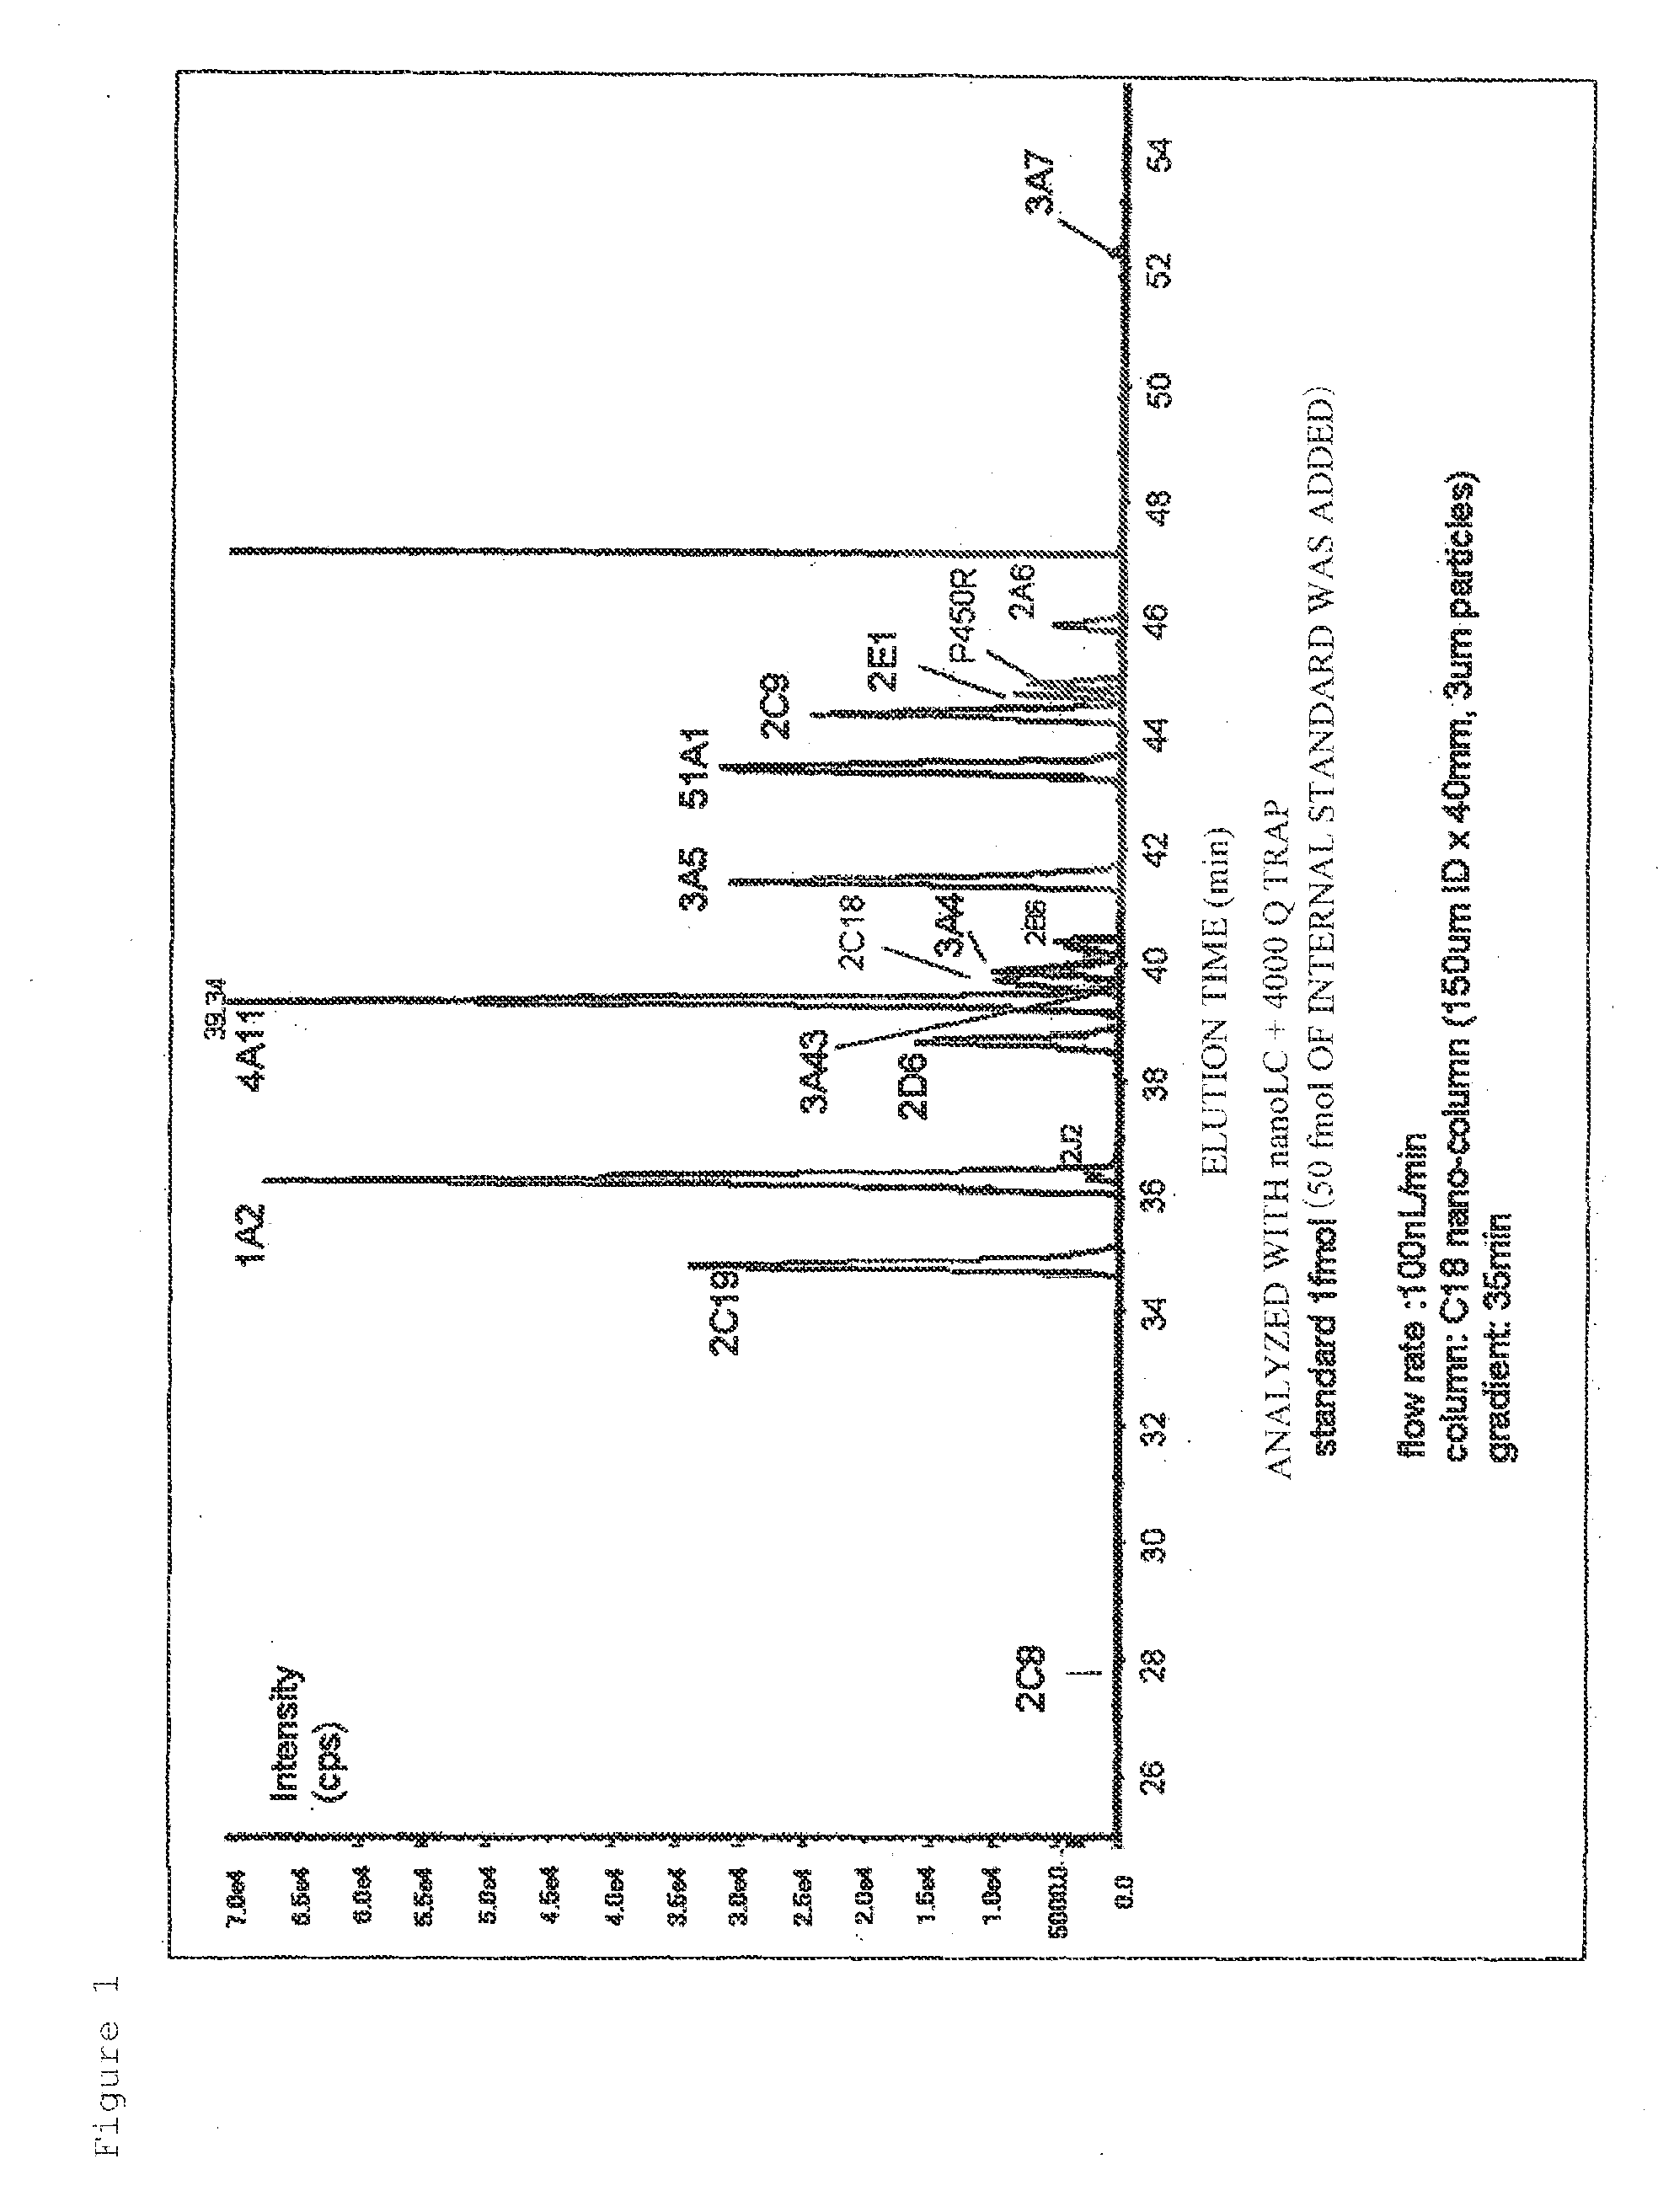 Peptide for use in simultaneous protein quantification of metabolizing enzymes using mass spectrometric analysis apparatus